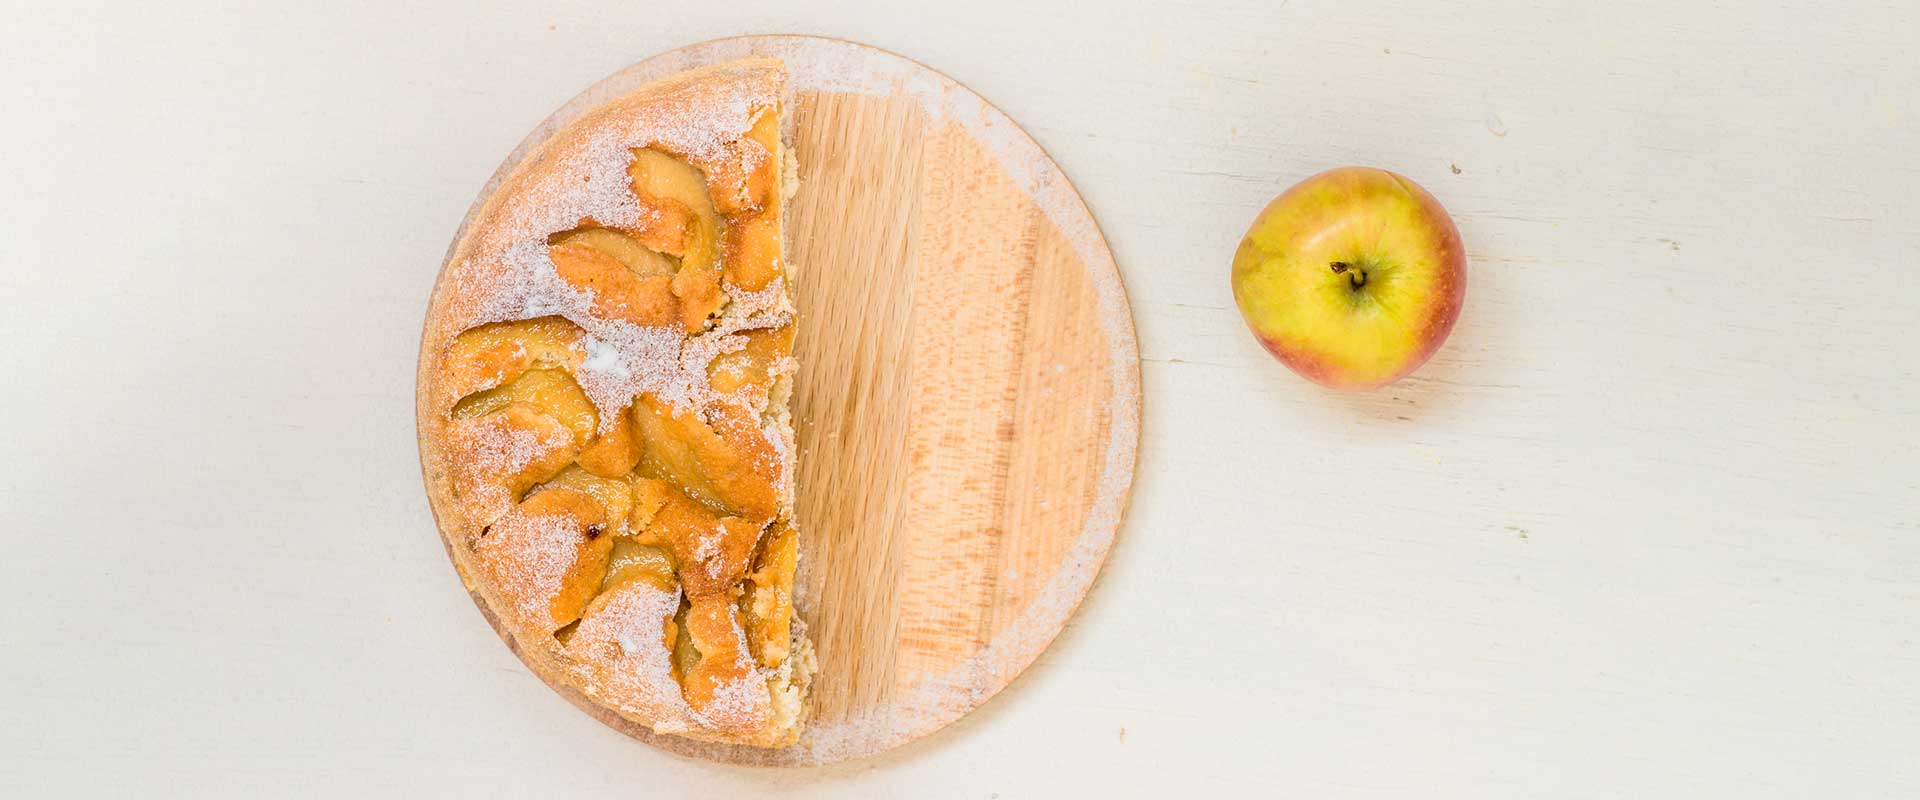 half an apple pie and a single apple on a wooden cutting board